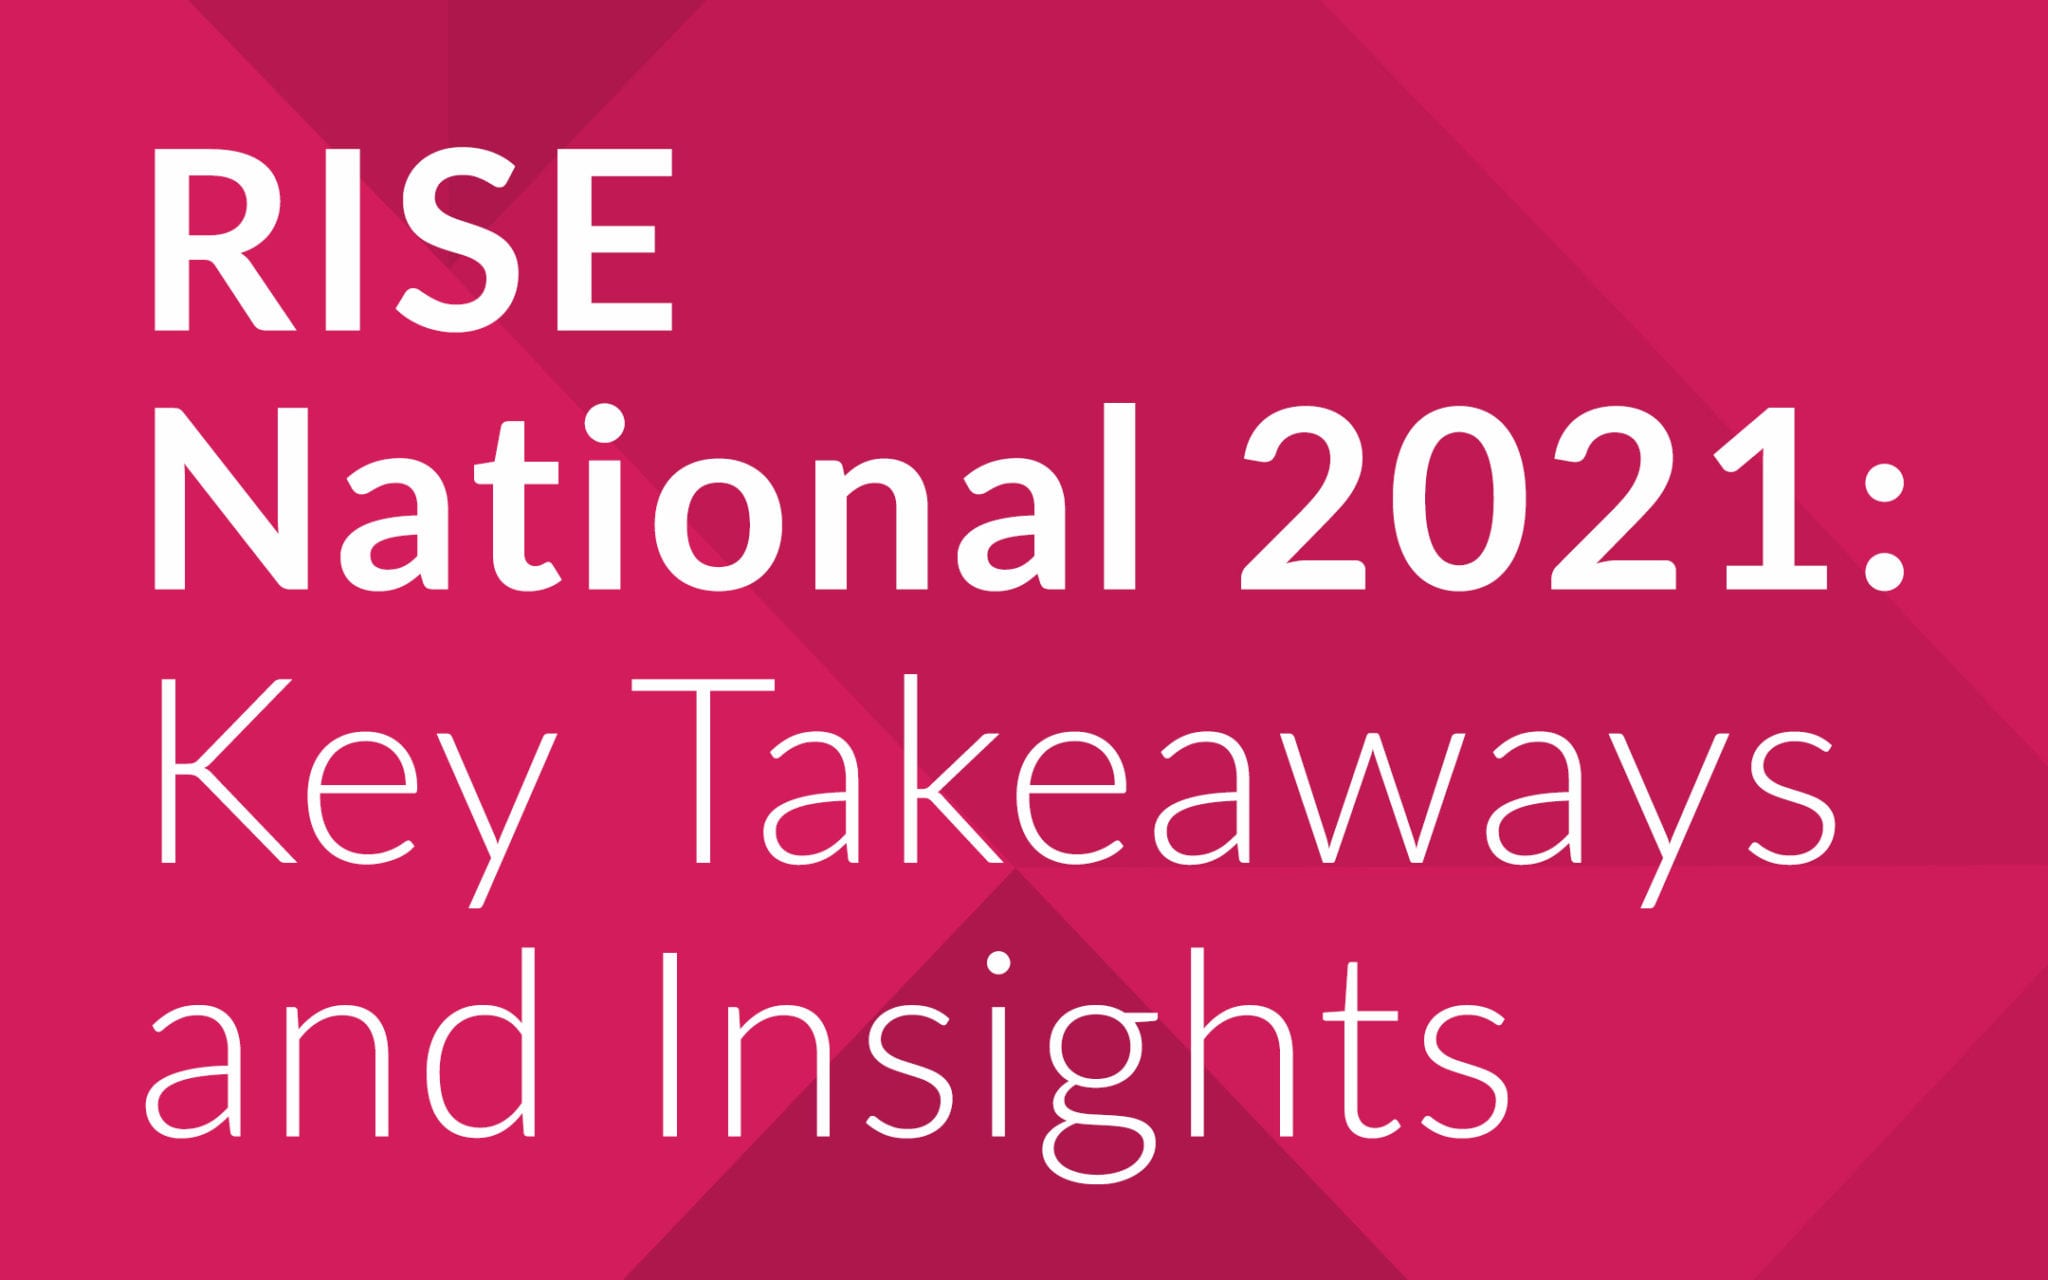 RISE National Health Experts Share Key Takeaways, Insights